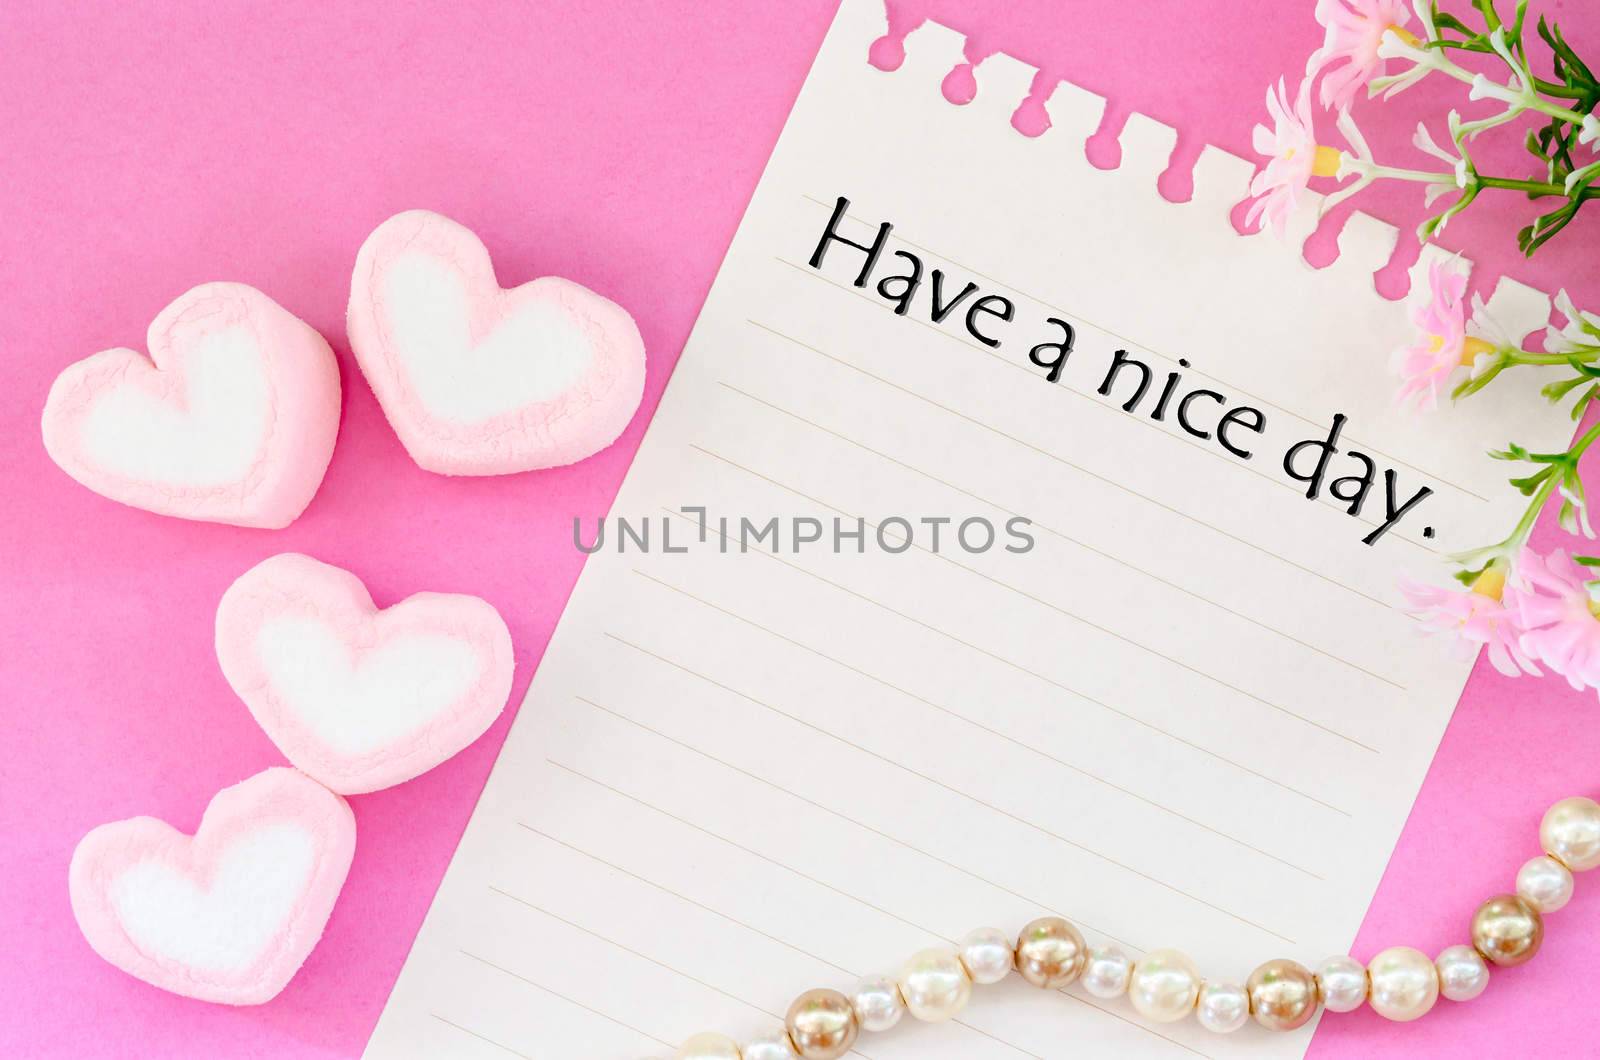 Have a nice day written with sweet heart shape of pink marshmallows with flower on pink background.